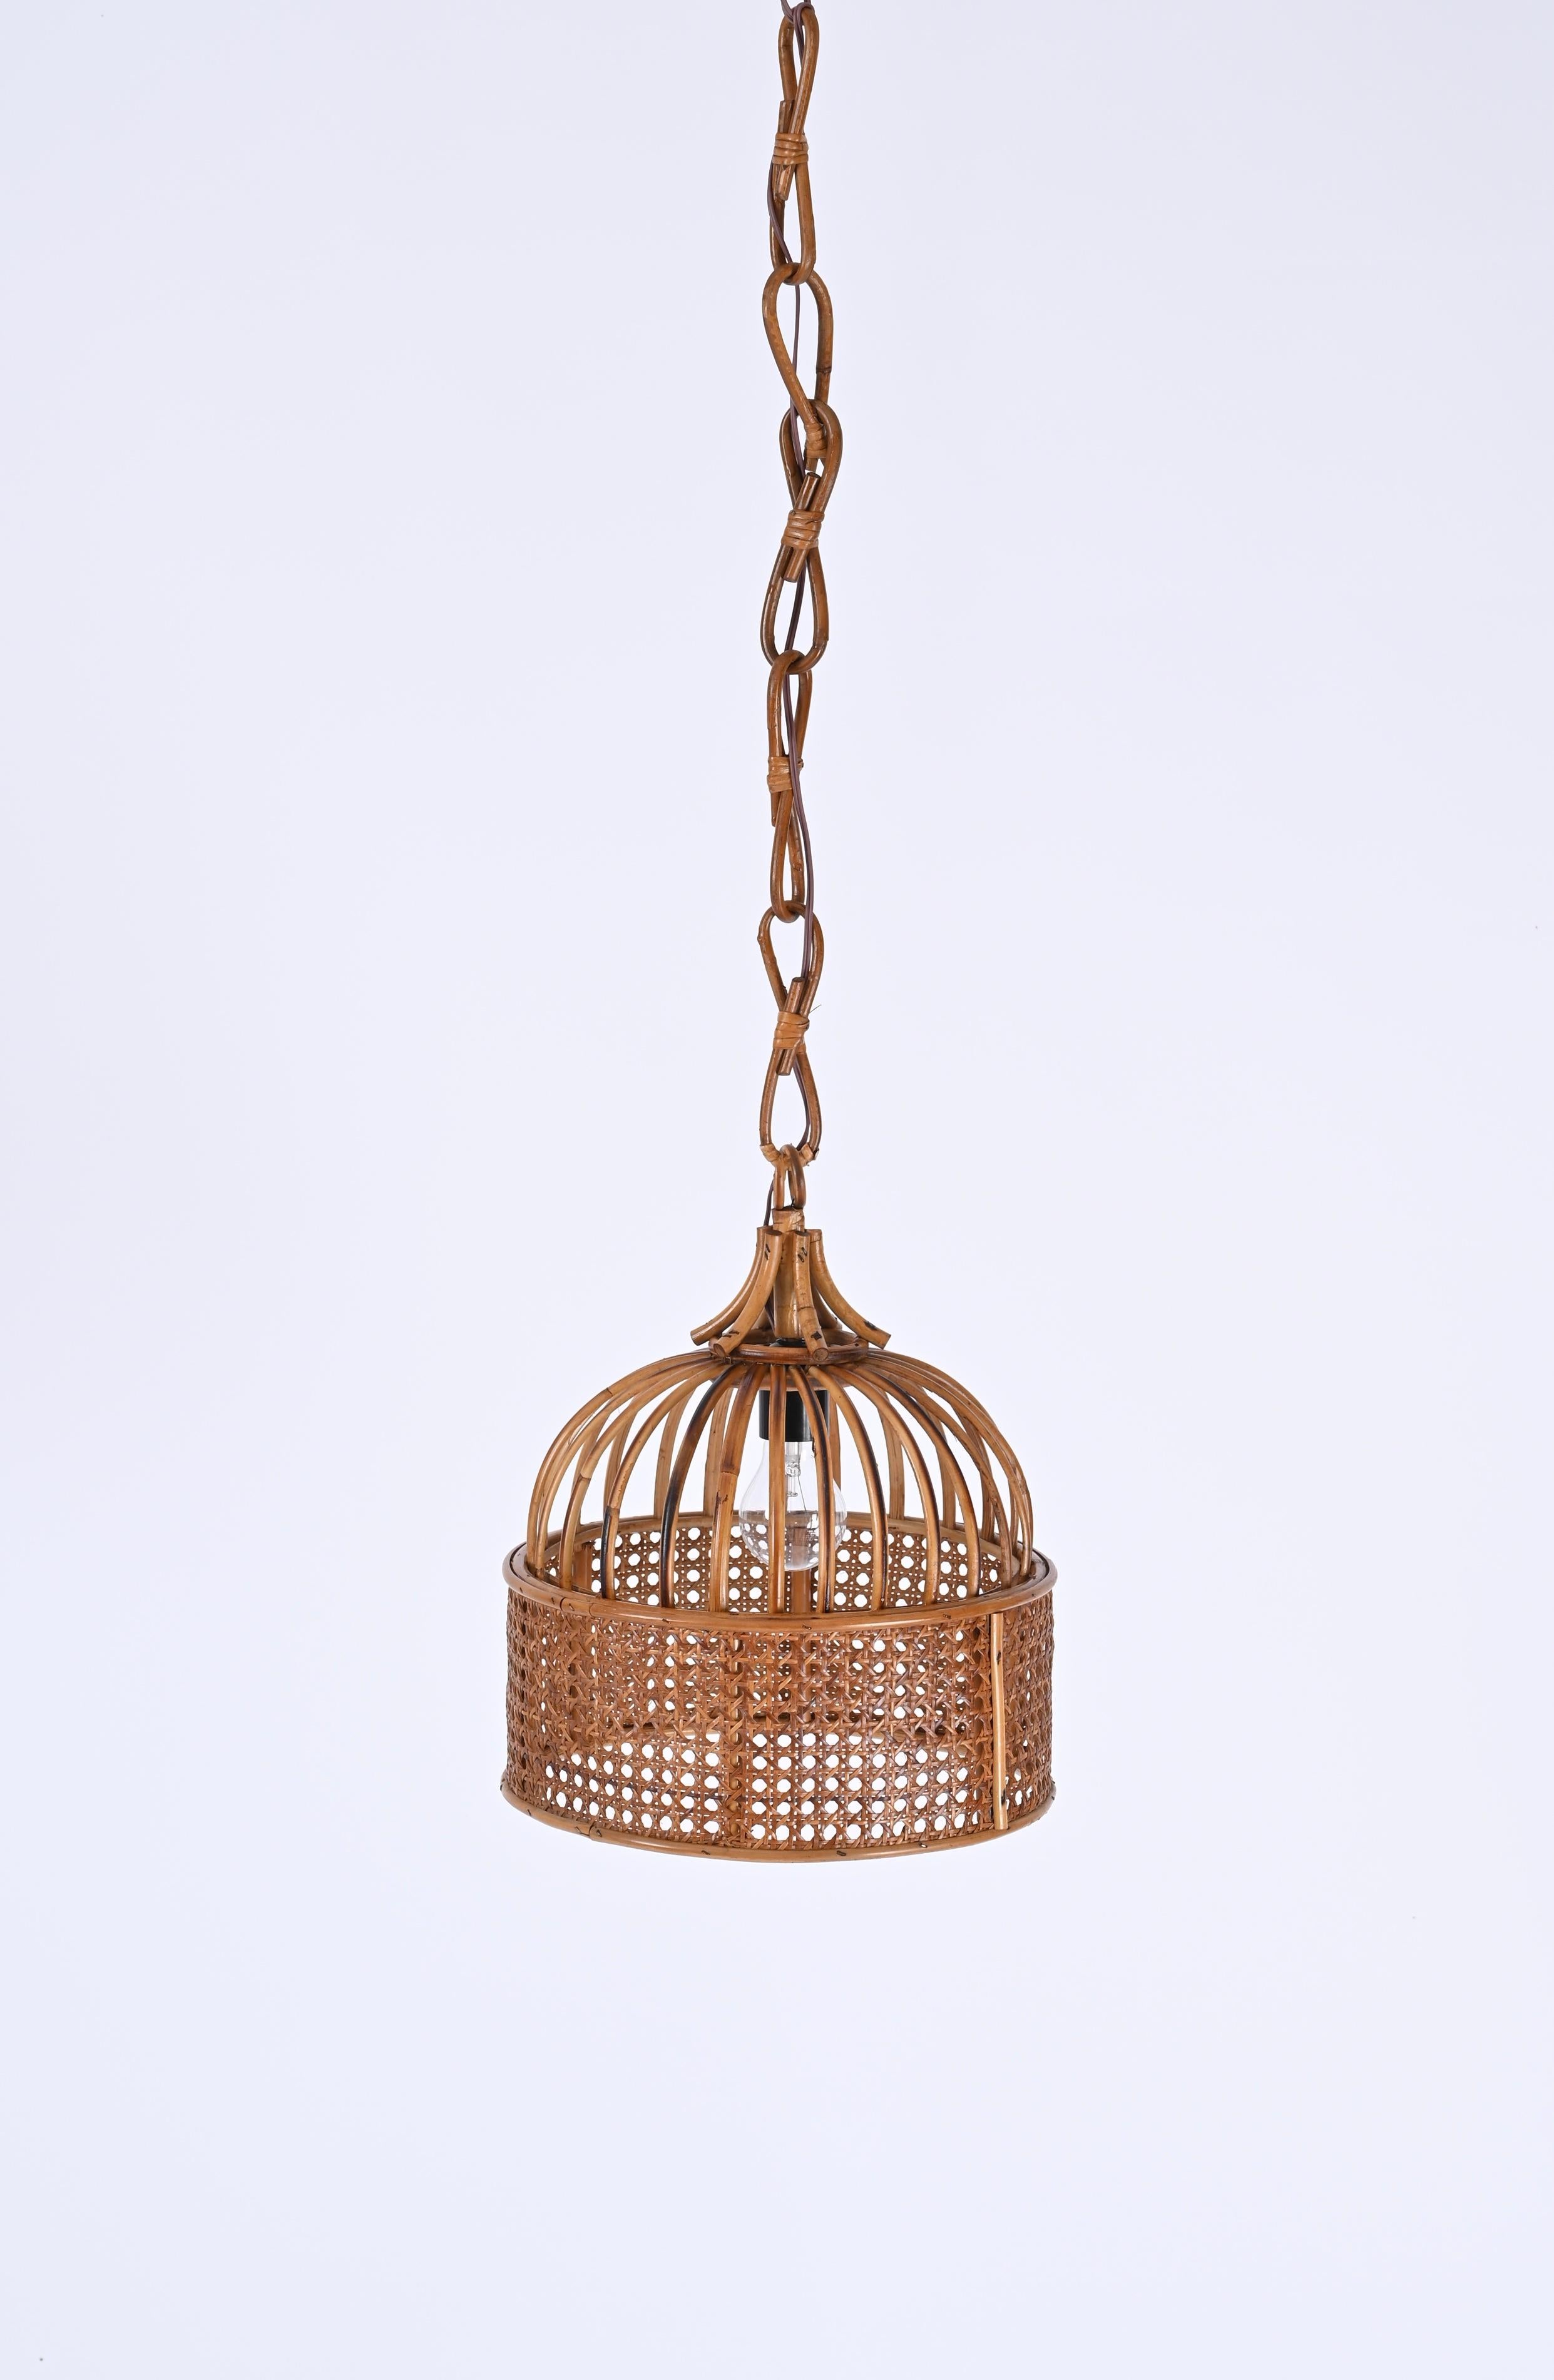 Lovely round pendant in bamboo and rattan with Vienna straw wicker shade. This gorgeous French Riviera style chandelier was designed in Italy in the 1970s. 

This unique pendant is made in a beautiful combination of curved rattan and bamboo with the